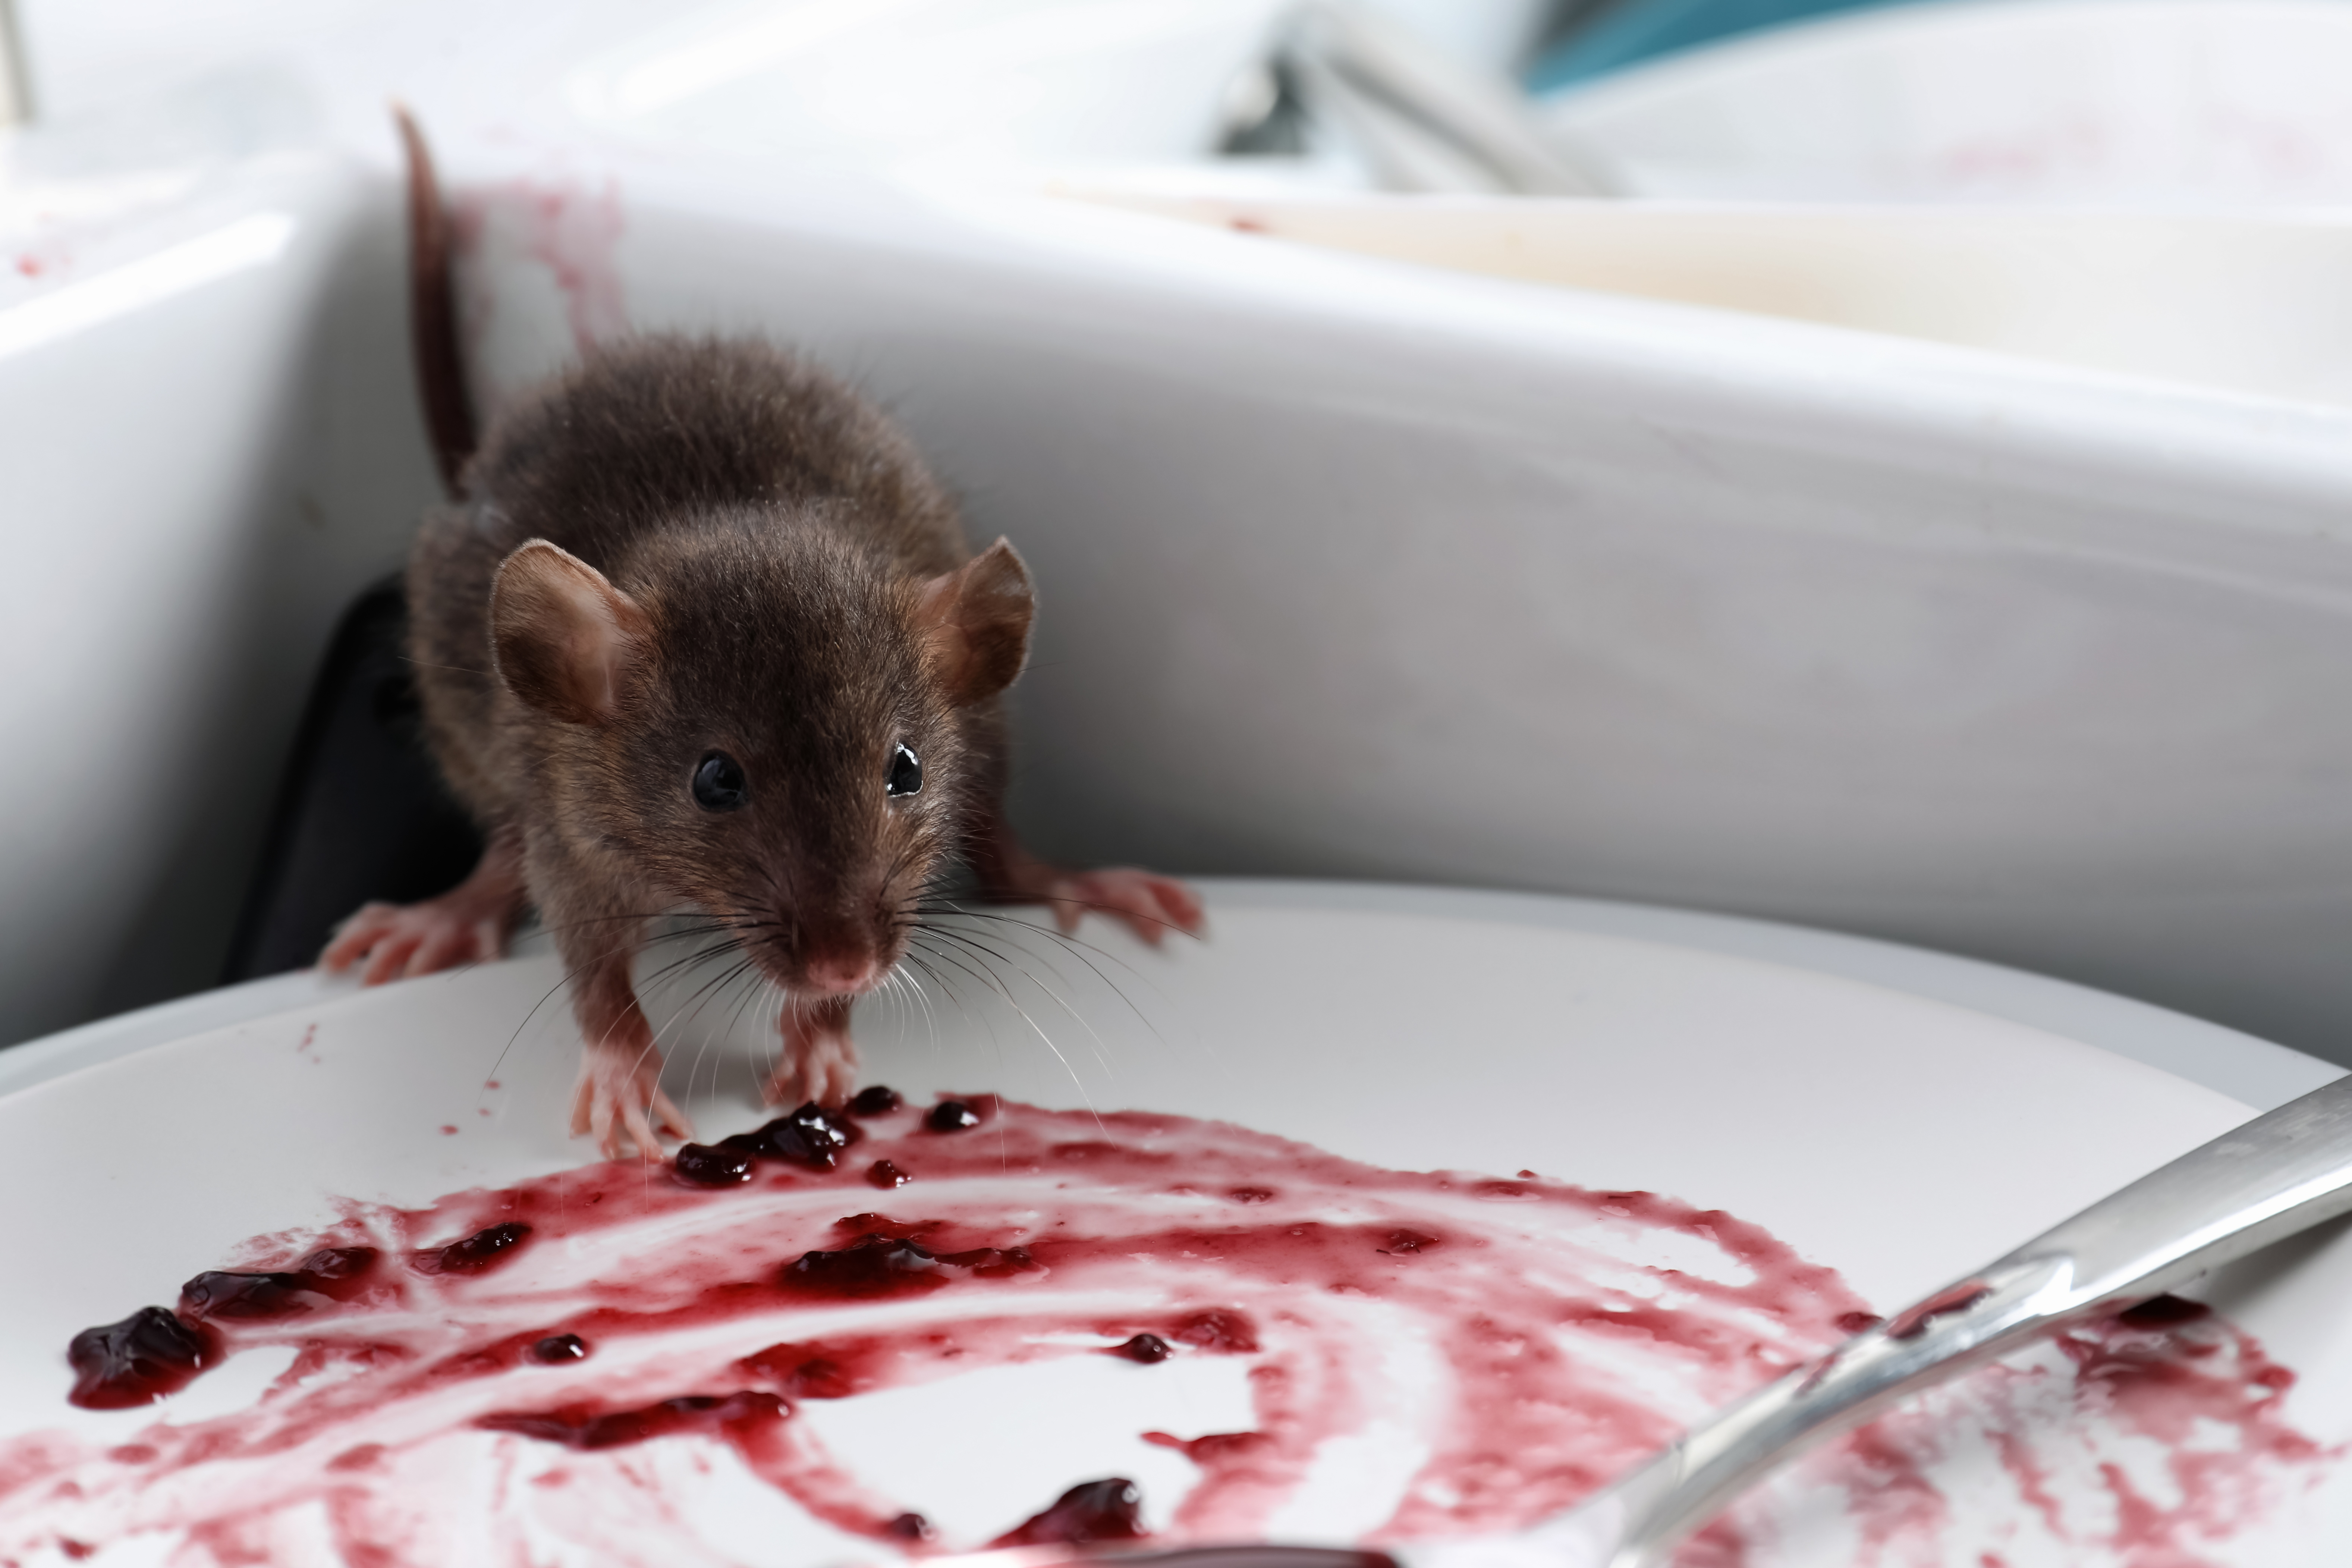 Rat on plate with cranberry sauce